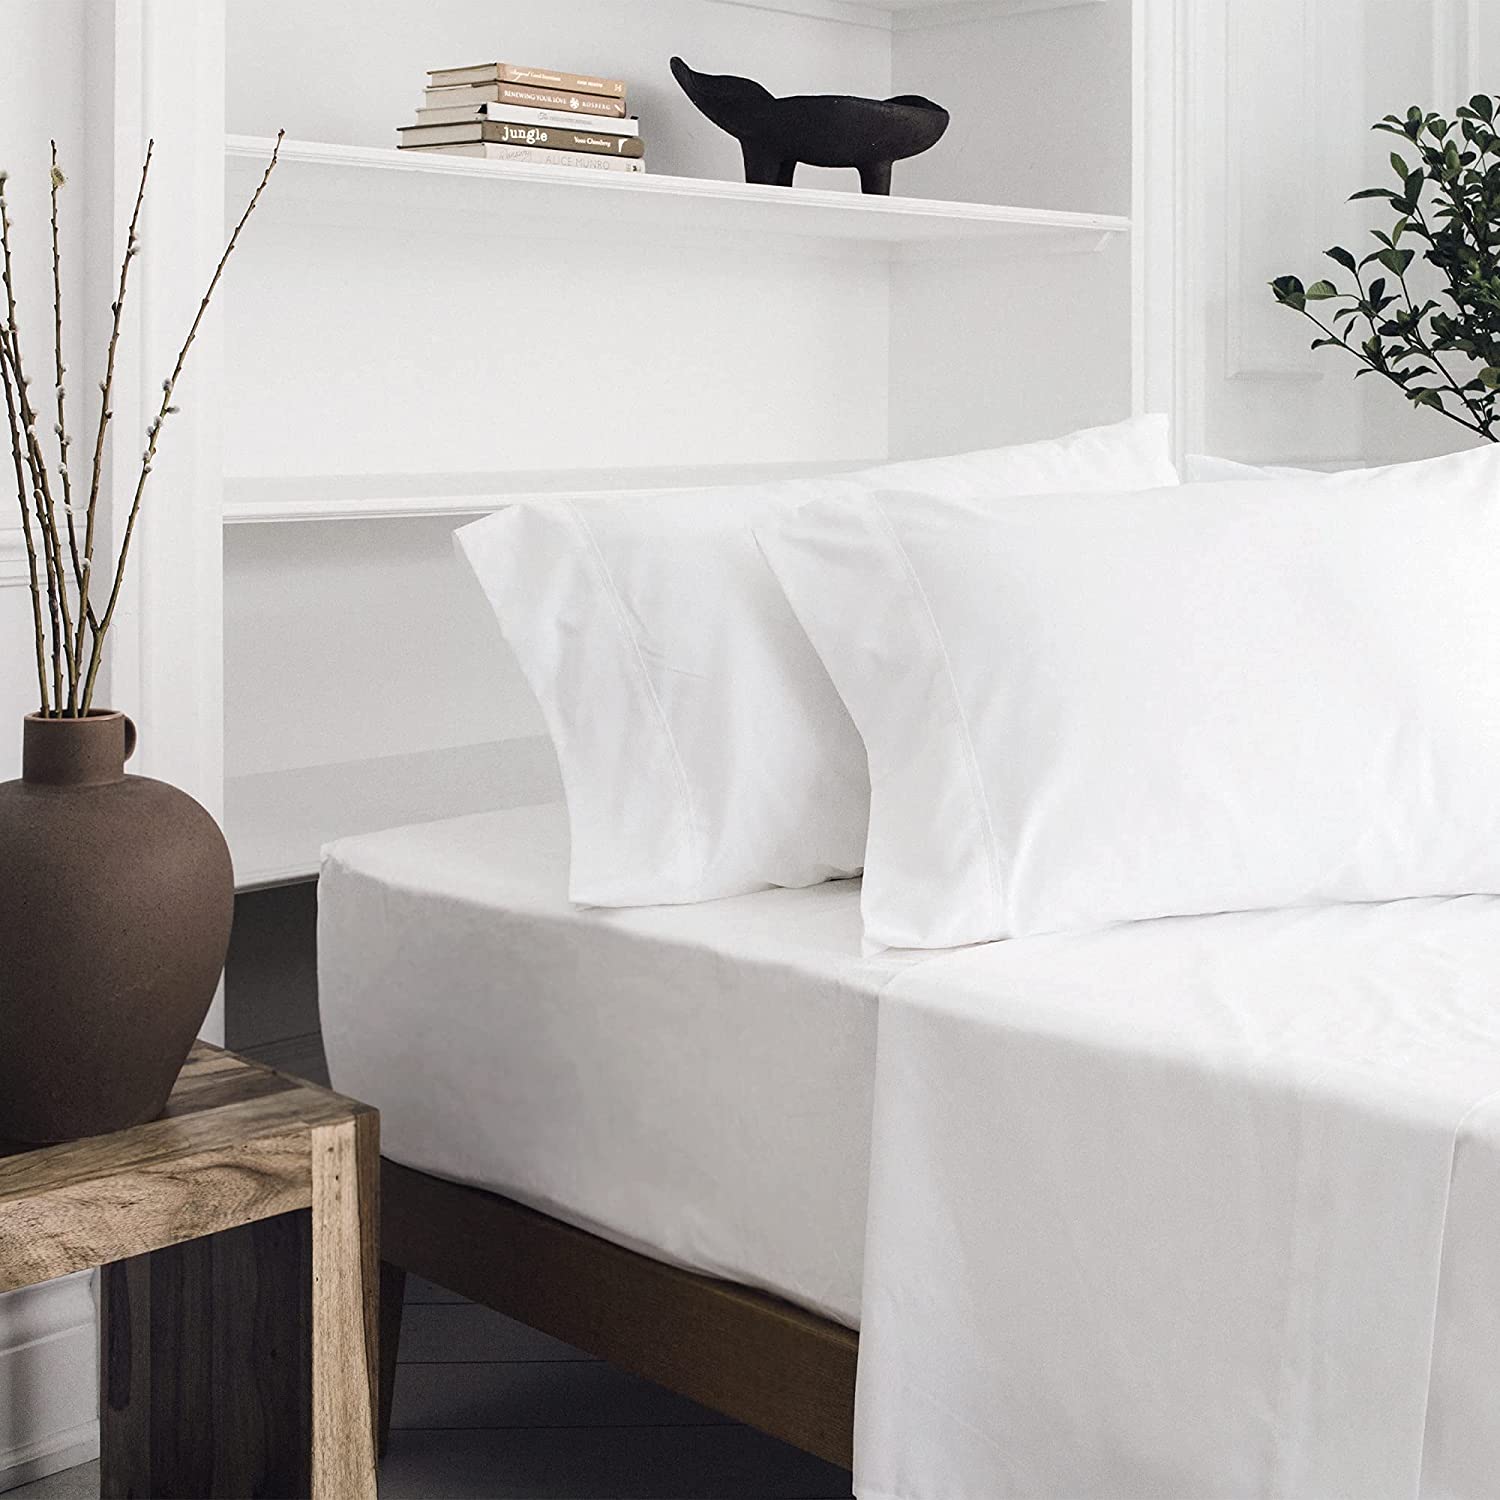 4 Flat Sheets Egyptian Cotton Top Sheet White at-EgyptianHomeLinens.com